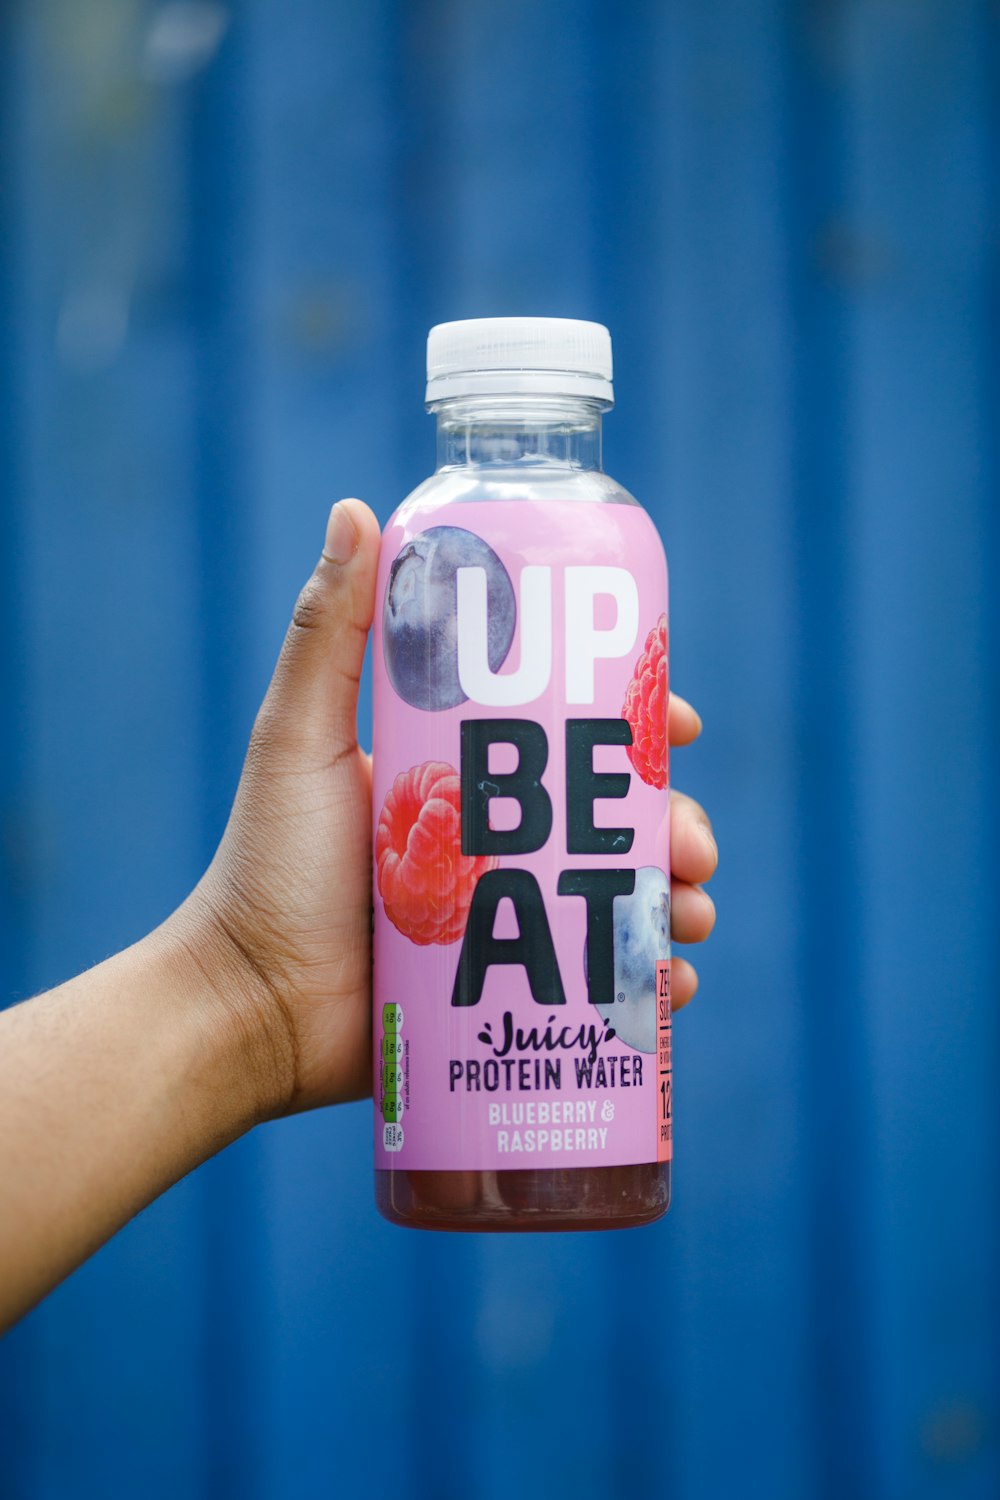 UP Beat protein water bottle